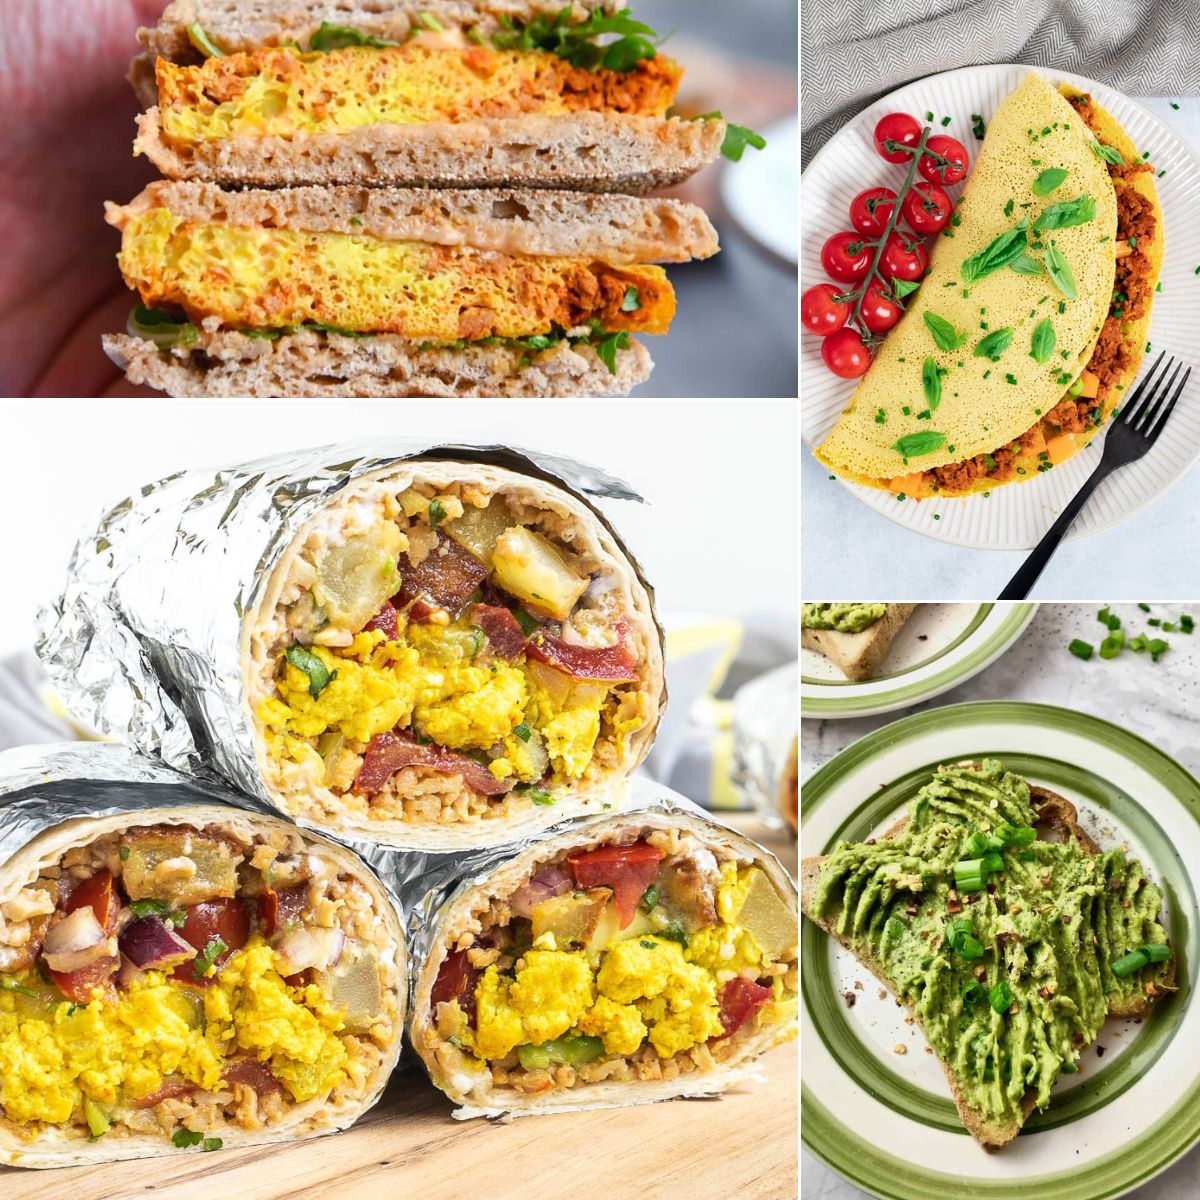 Photos of different vegan breakfast recipes from burrito, to omelette and sandwiches.